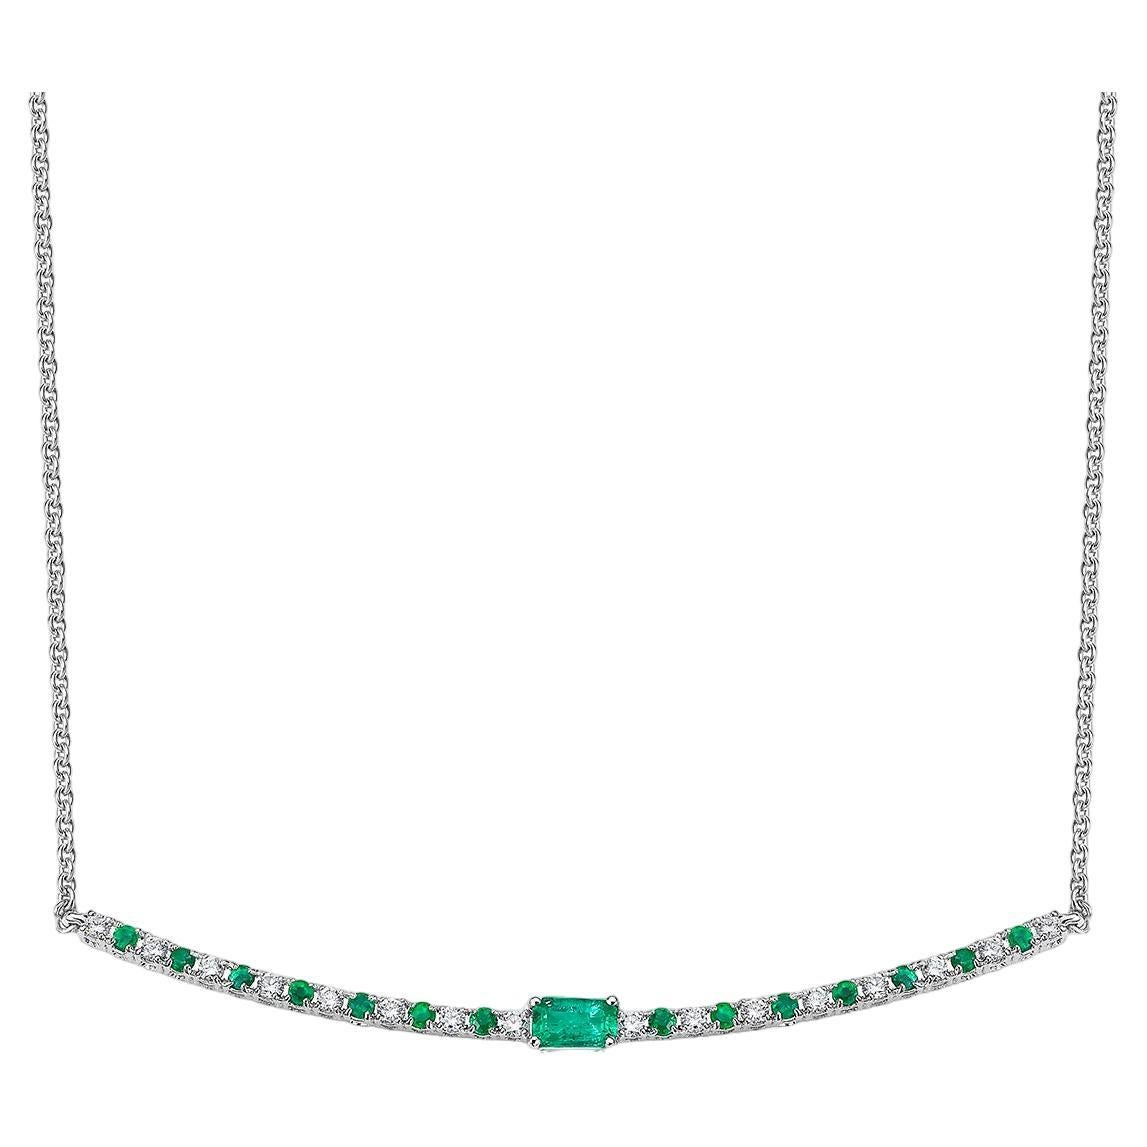 Emerald and Diamond Bar Necklace in 14K White Gold